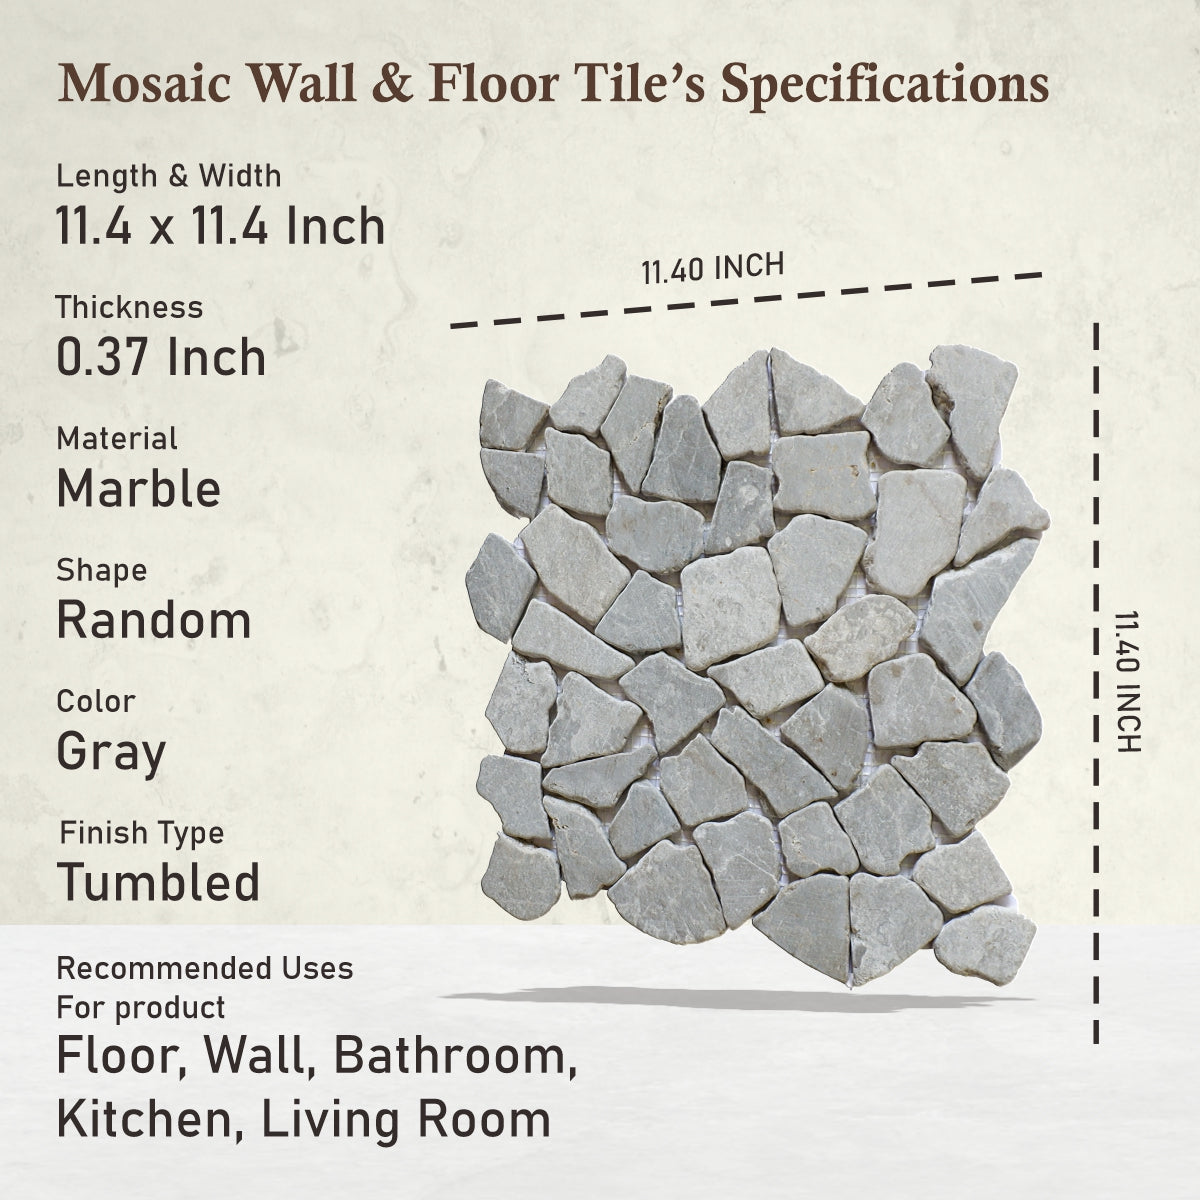 Grey Mosaic Tile for Floor and Wall, Nusa Grey Mosaic Tiles